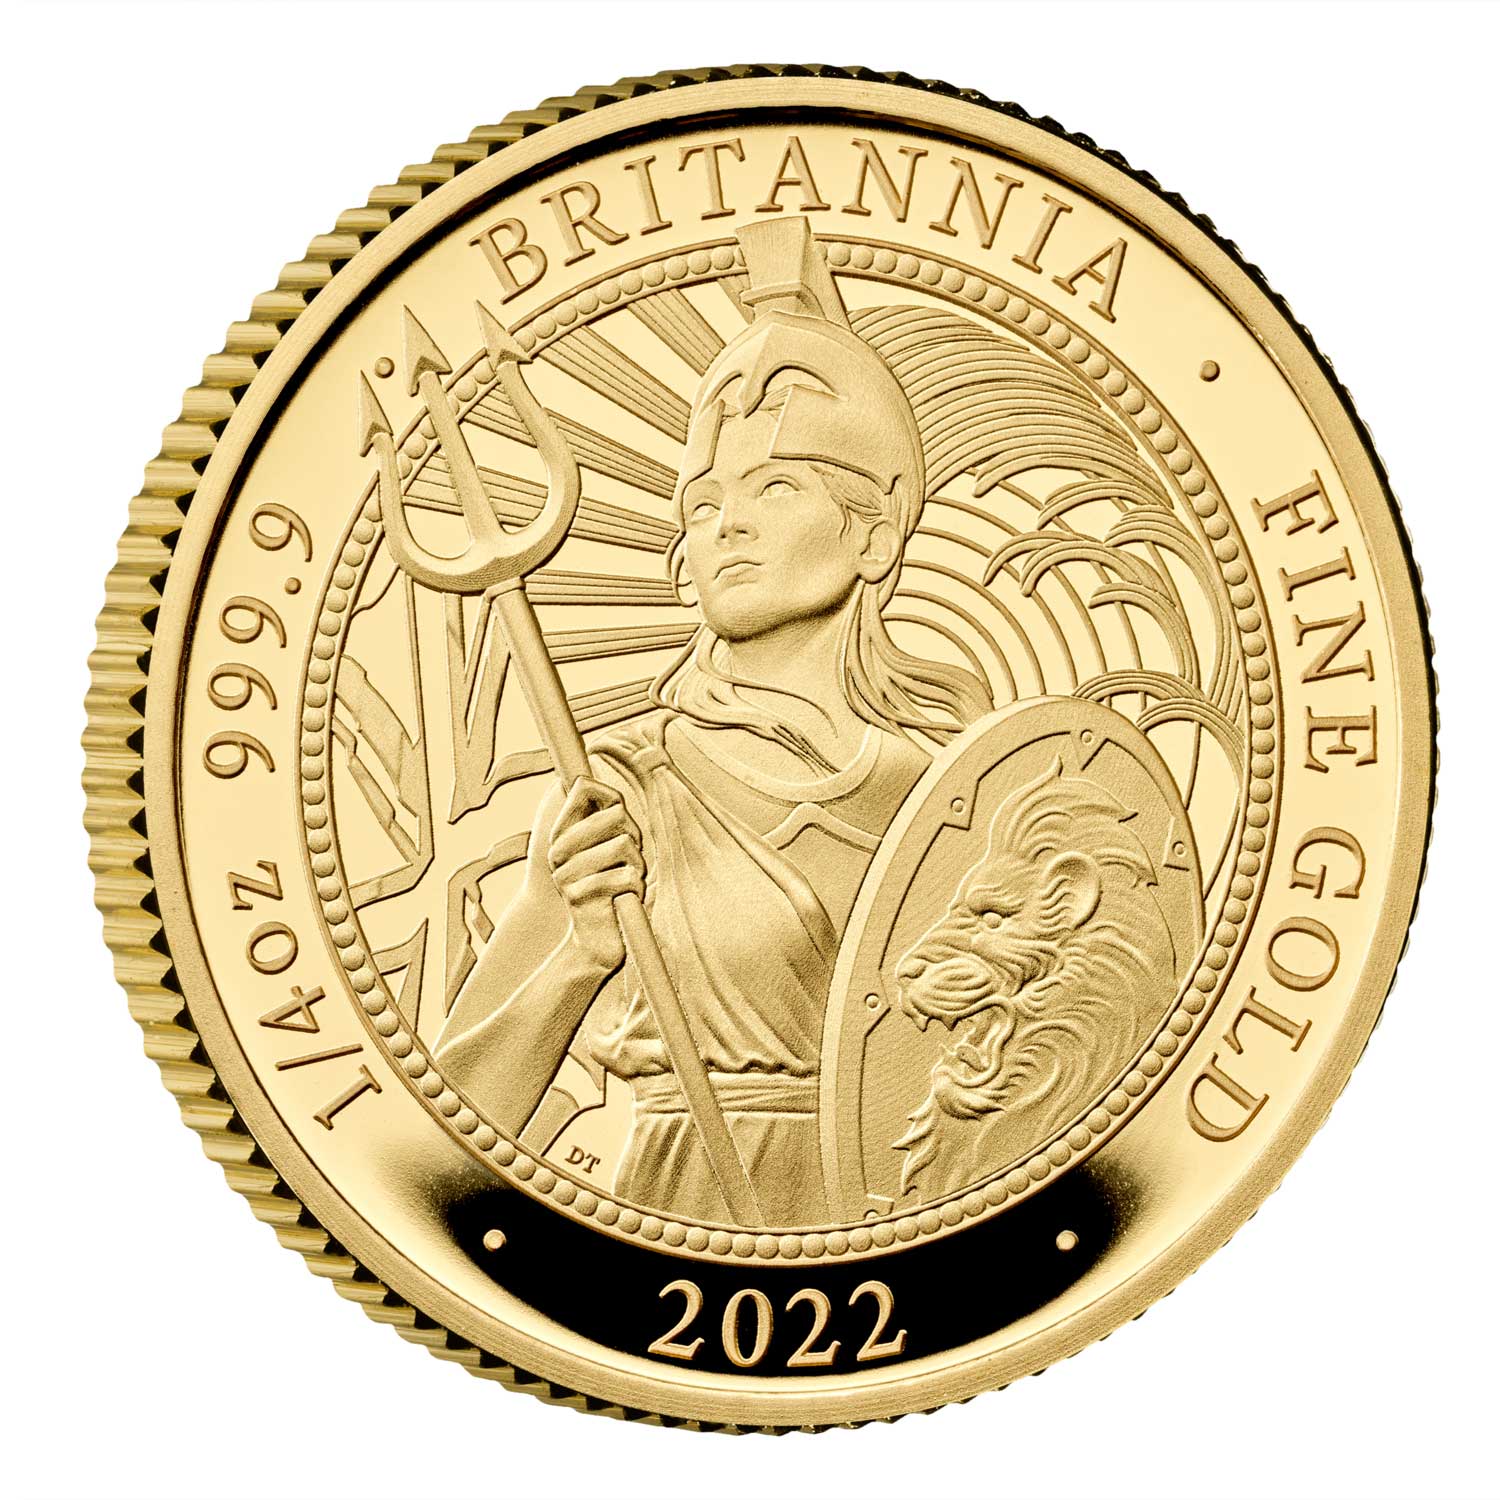 The Britannia 2022 UK 1/4oz Gold Proof Coin The Royal Mint